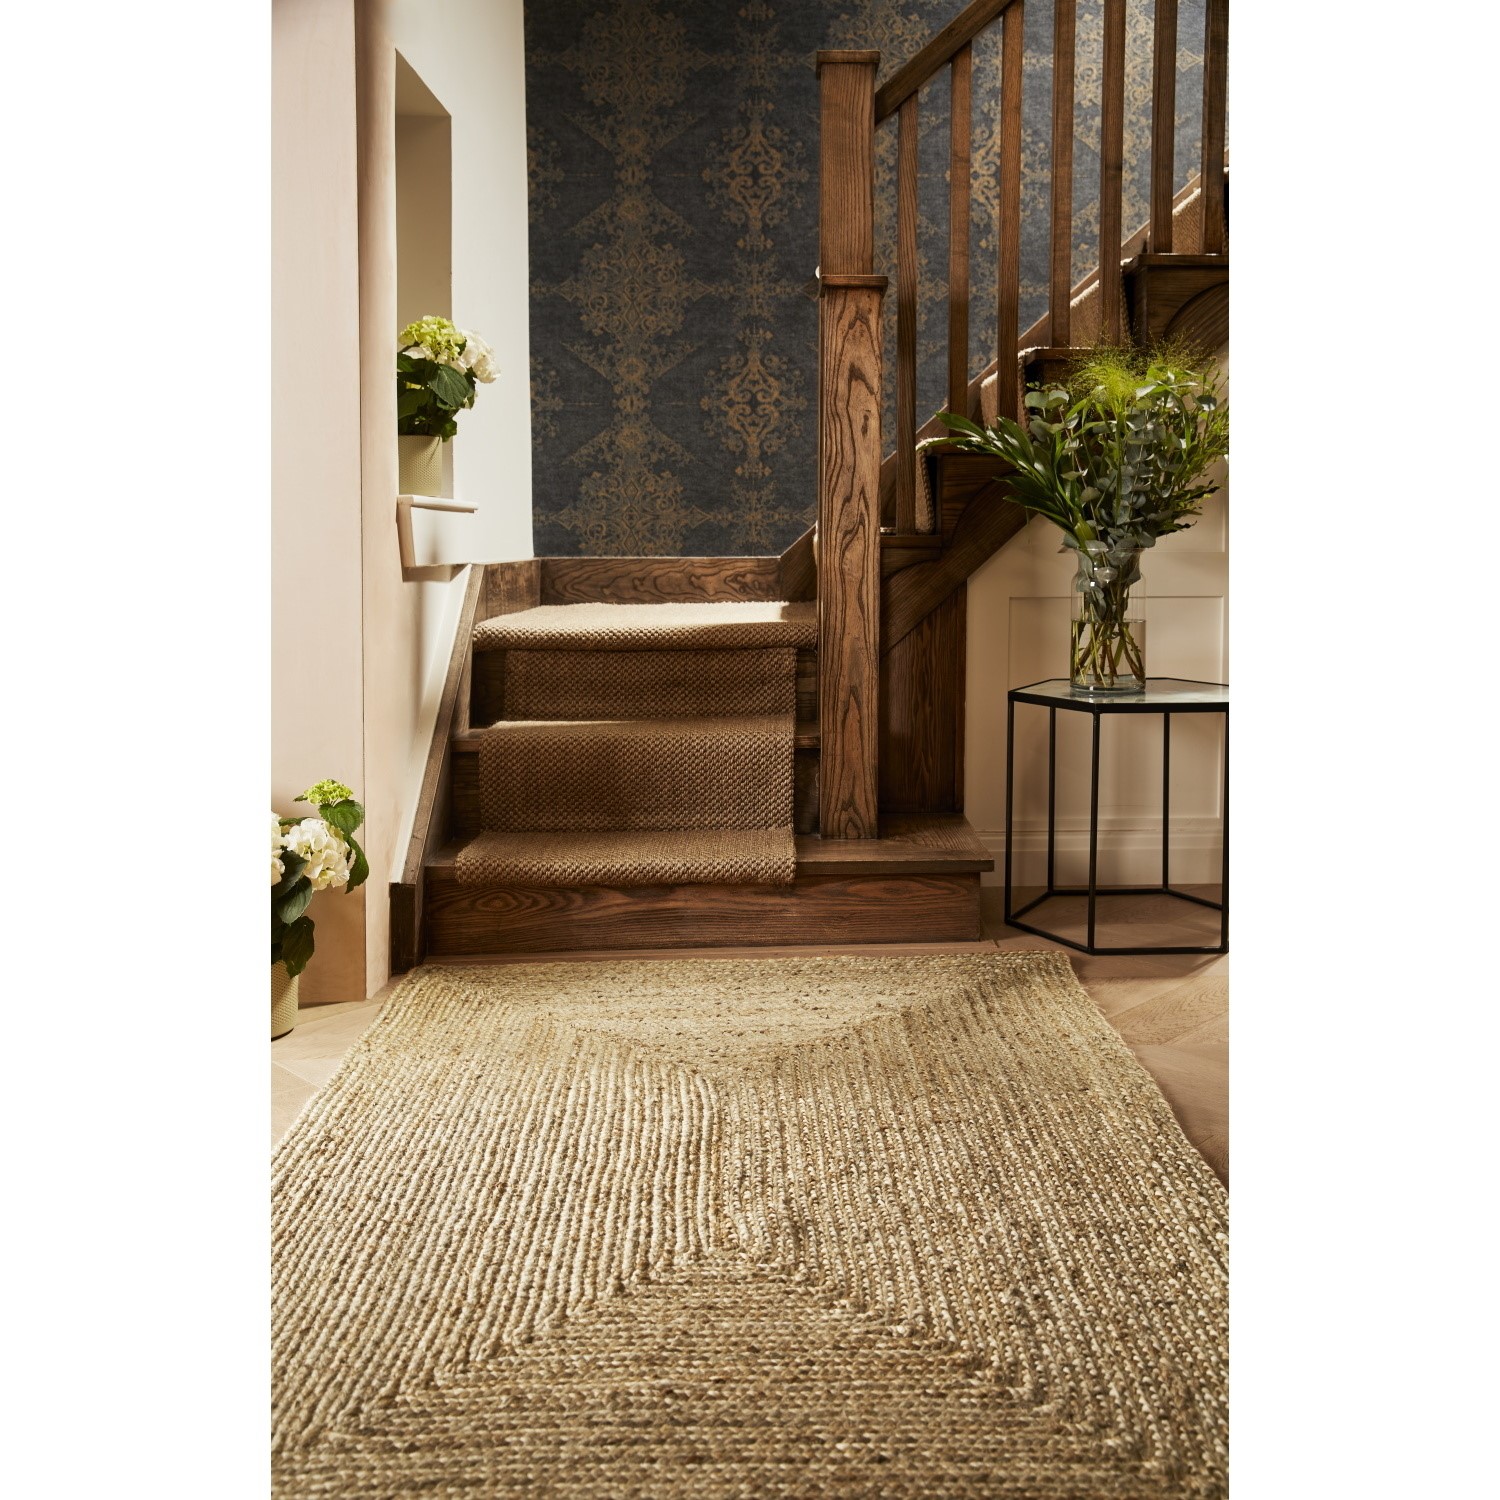 Read more about Large rectangle jute rug 200x290cm ripley